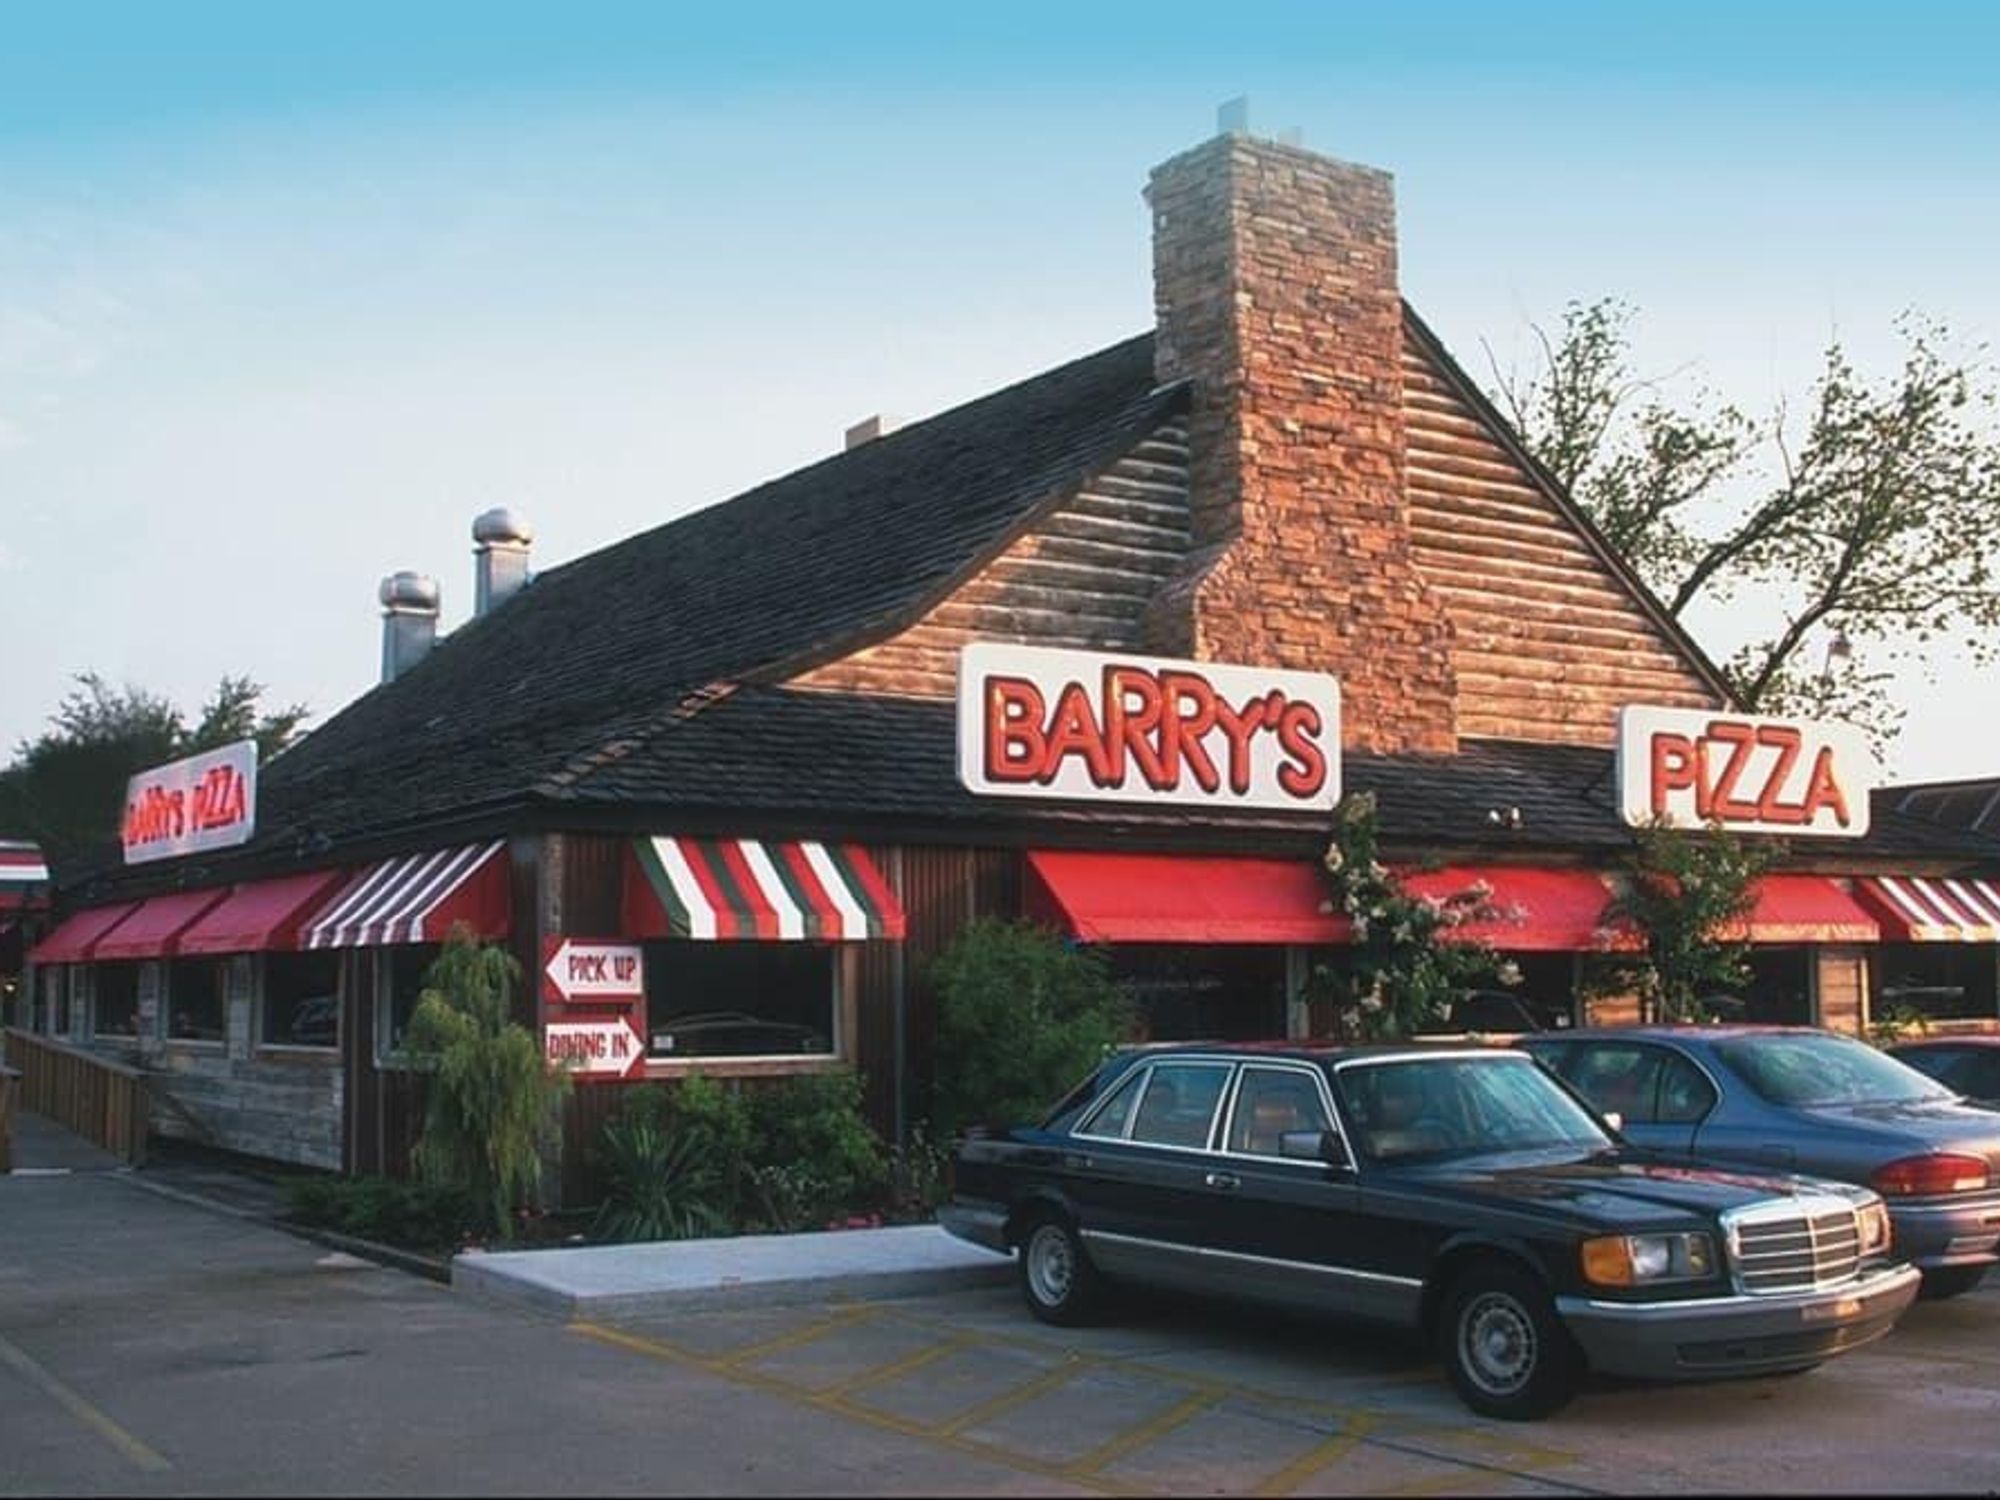 Barry's Pizza exterior